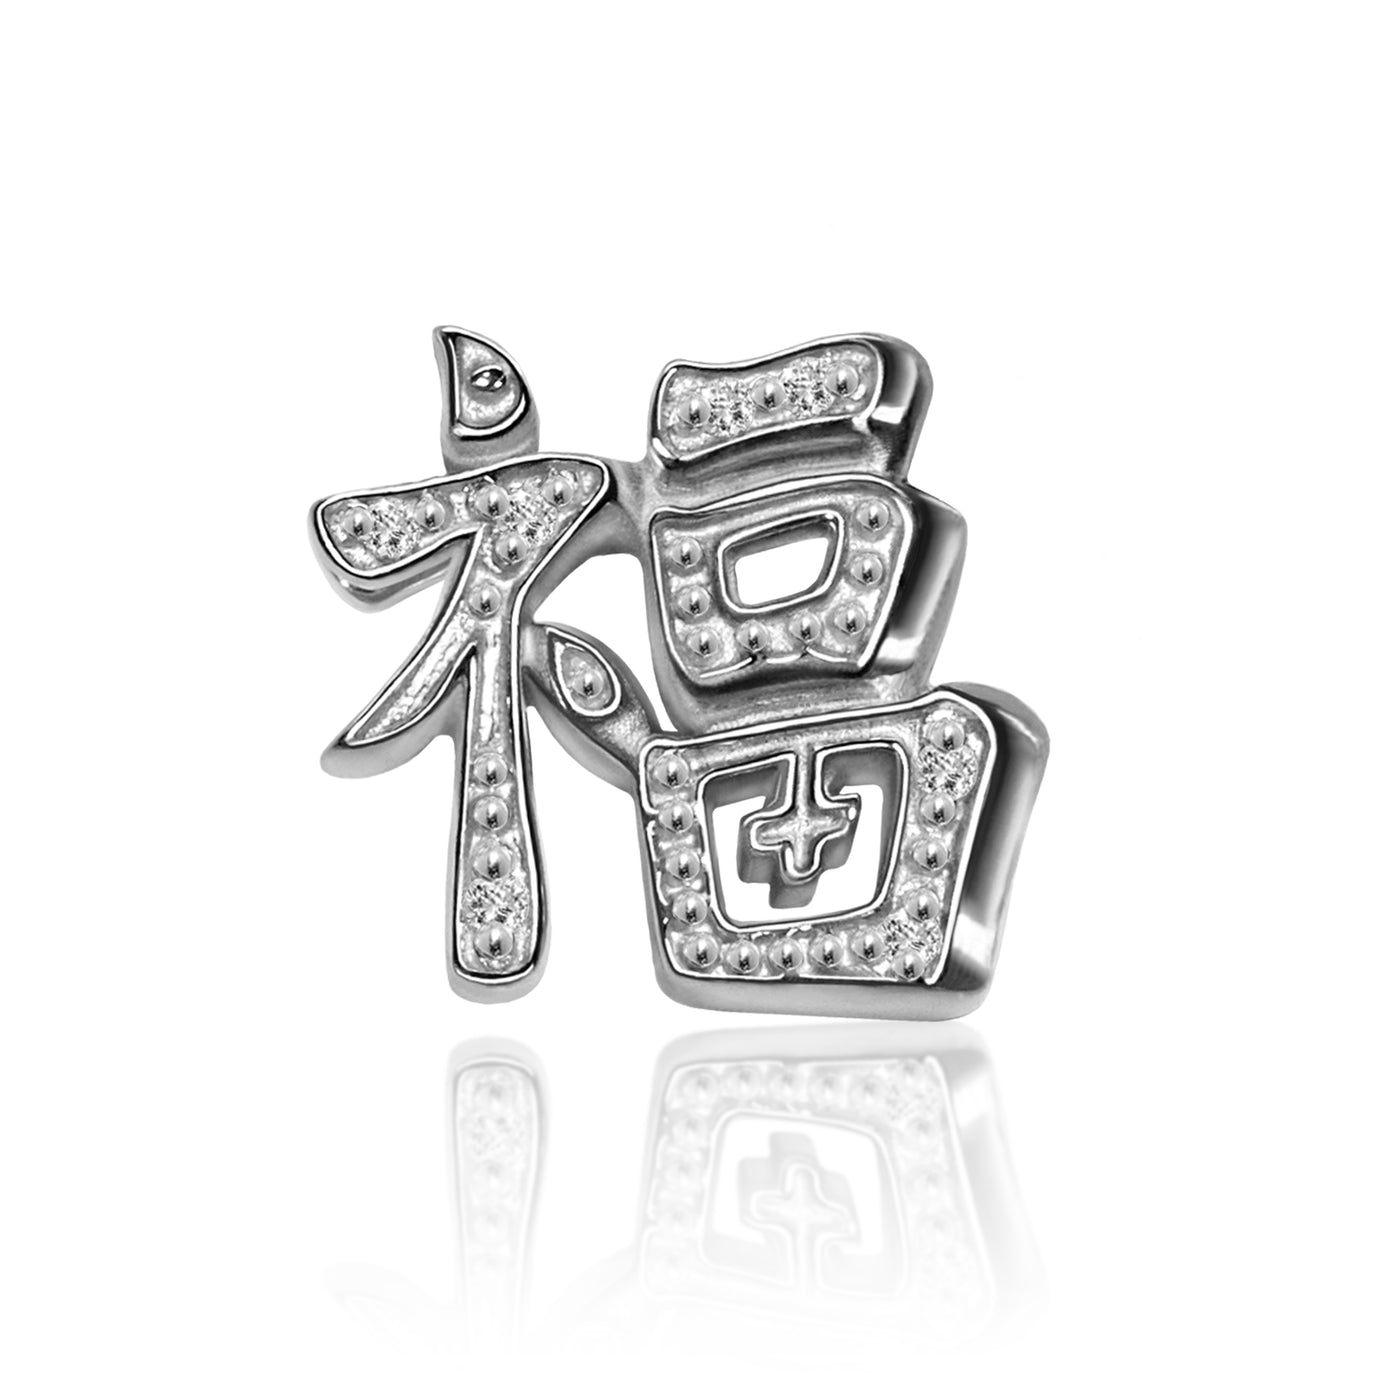 Faith Chinese Character "Luck"